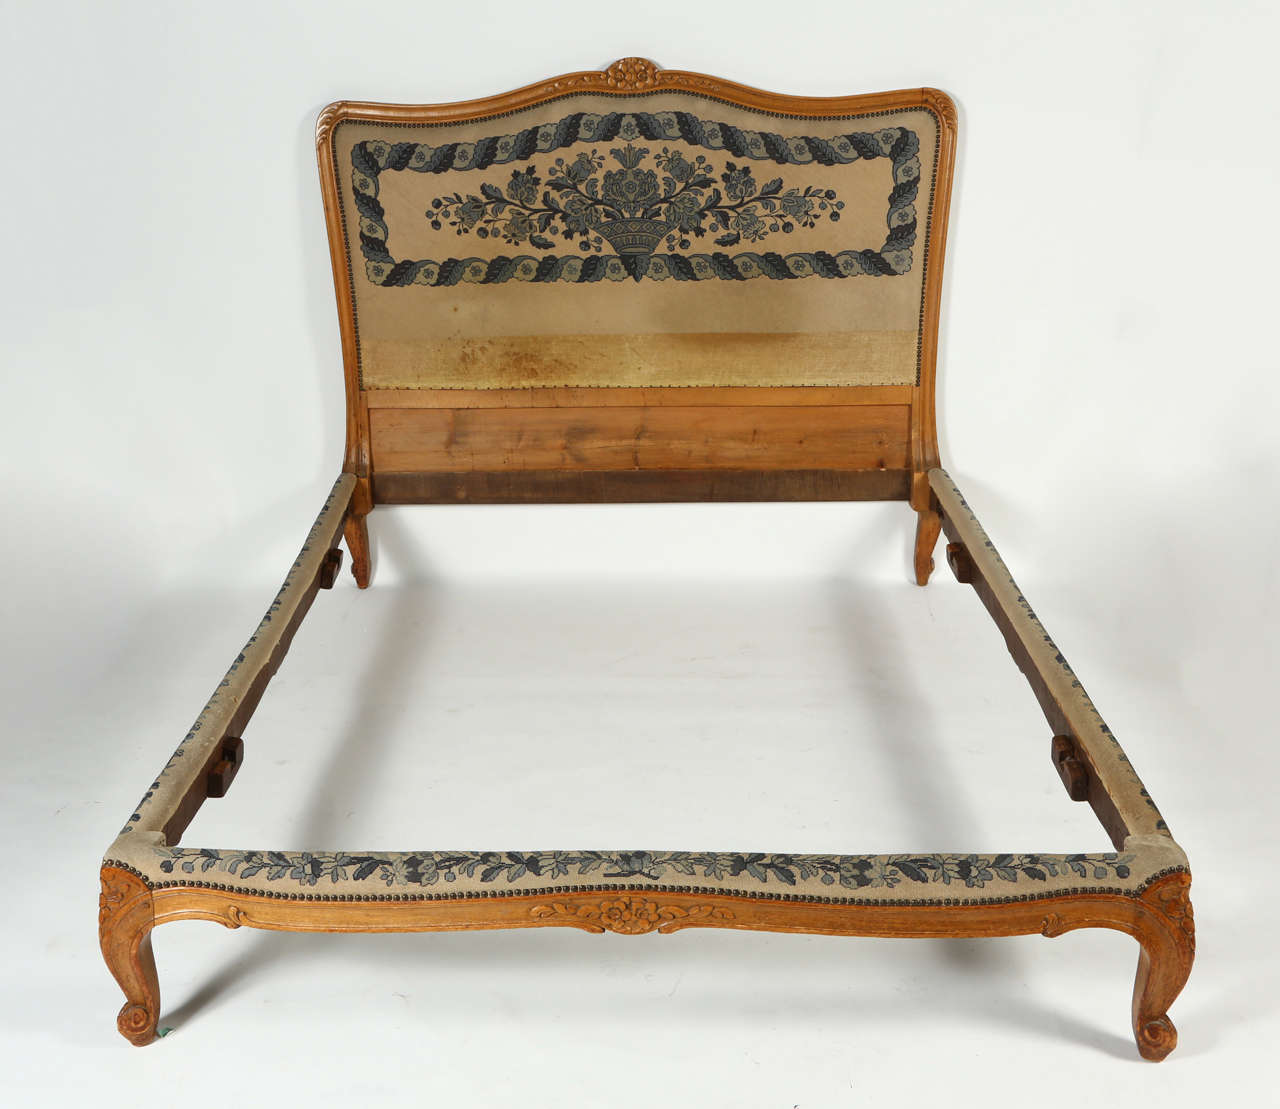 The headboard, side and foot end support of this 19th century French bed boasts lovely blue and white needlepoint. The oak frame is beautifully carved lending an elegance to any bedroom. Dates to circa 1880s.

Frame base measures 13